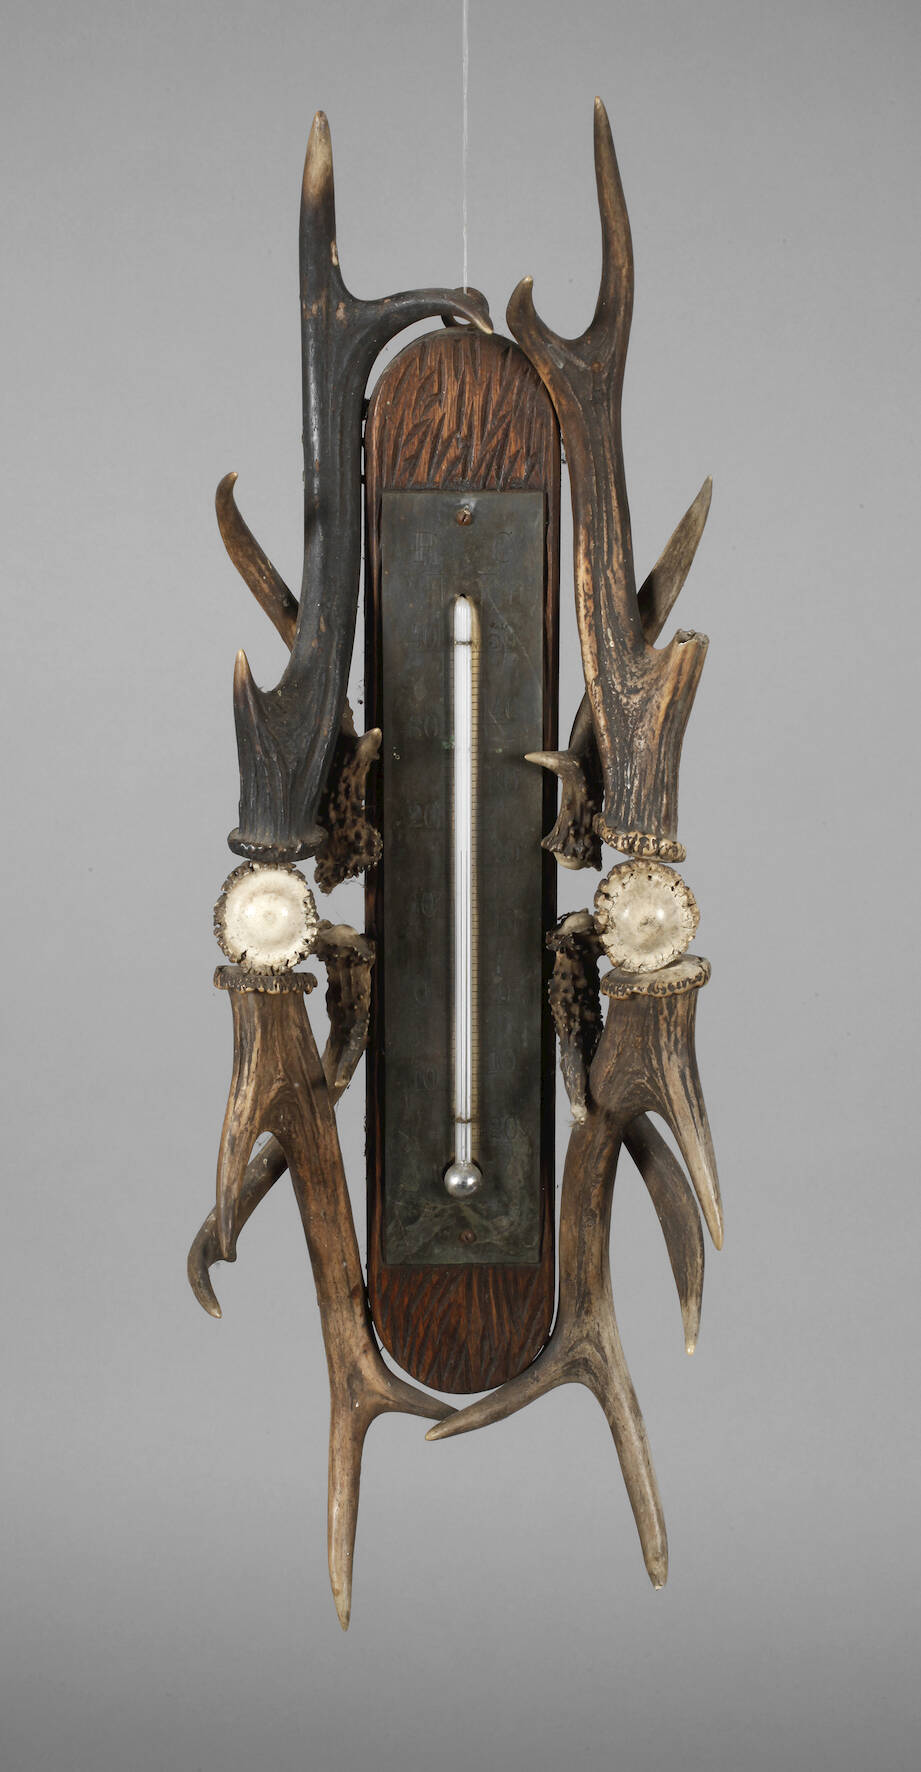 Jagdliches Thermometer